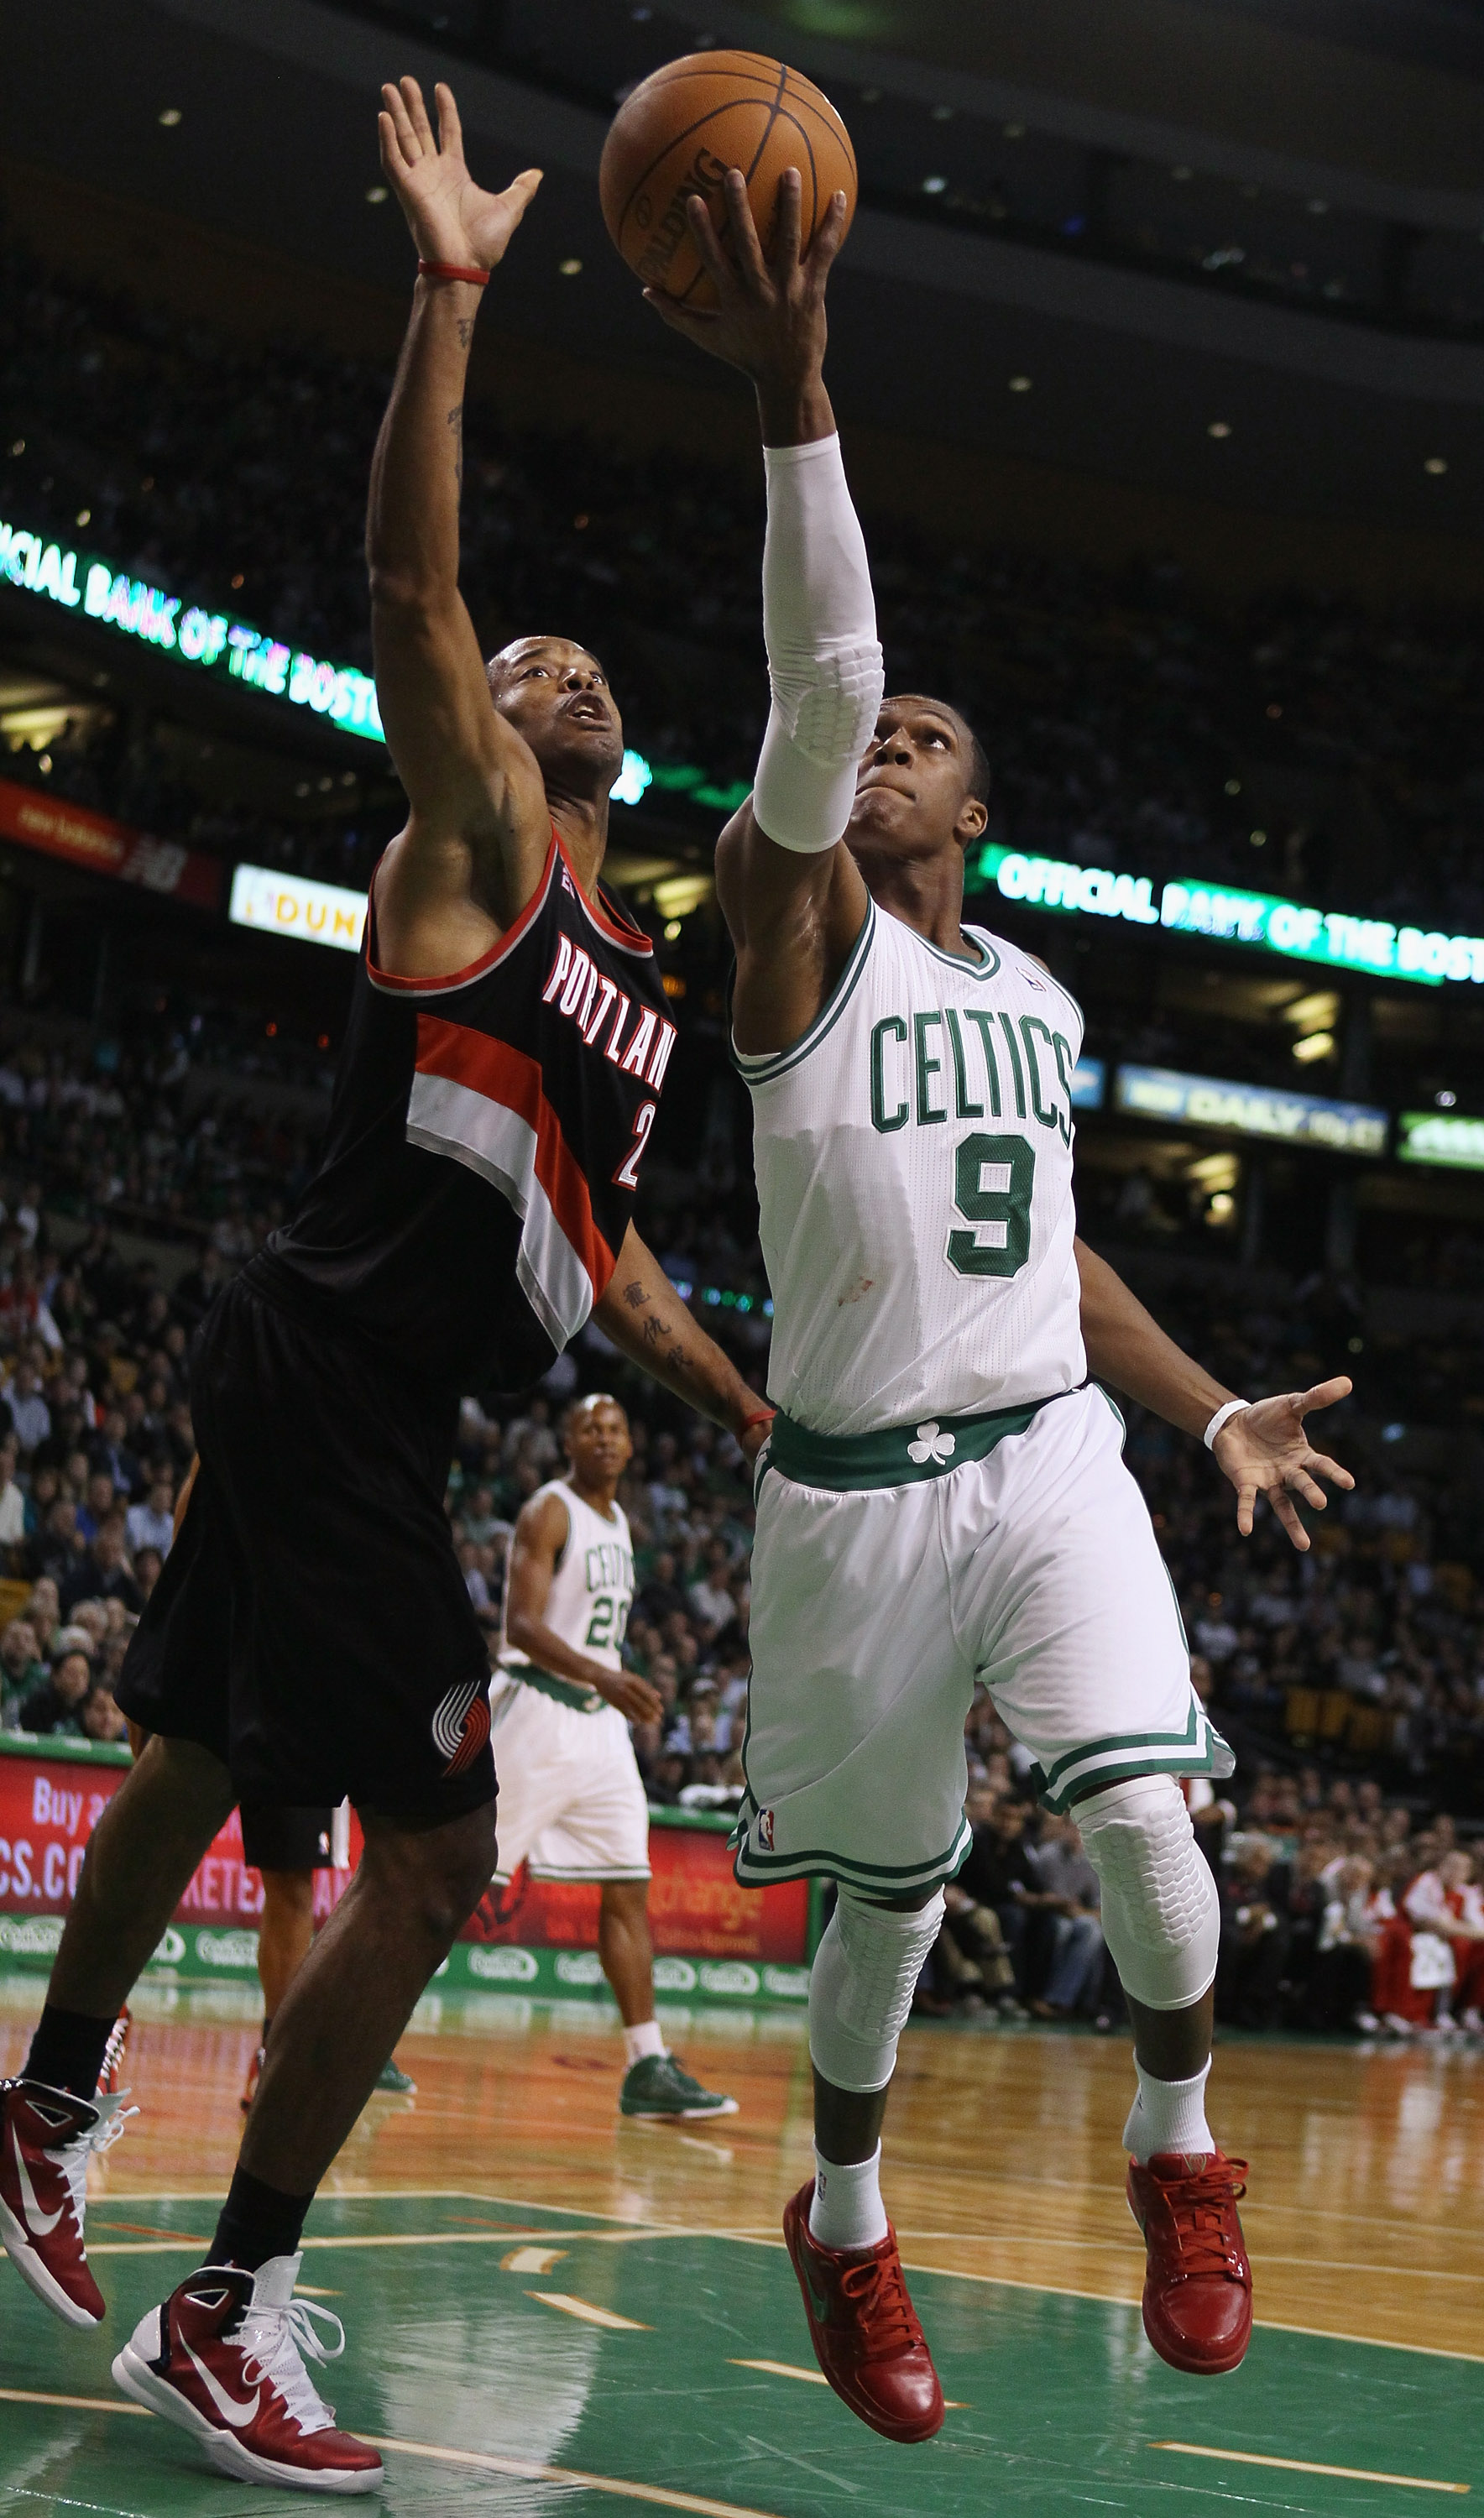 BOSTON - DECEMBER 01:  Rajon Rondo #9 of the Boston Celtics heads for the basket as Marcus Camby #23 of the Portland Trailblazers defends on December 1, 2010 at the TD Garden in Boston, Massachusetts.  NOTE TO USER: User expressly acknowledges and agrees